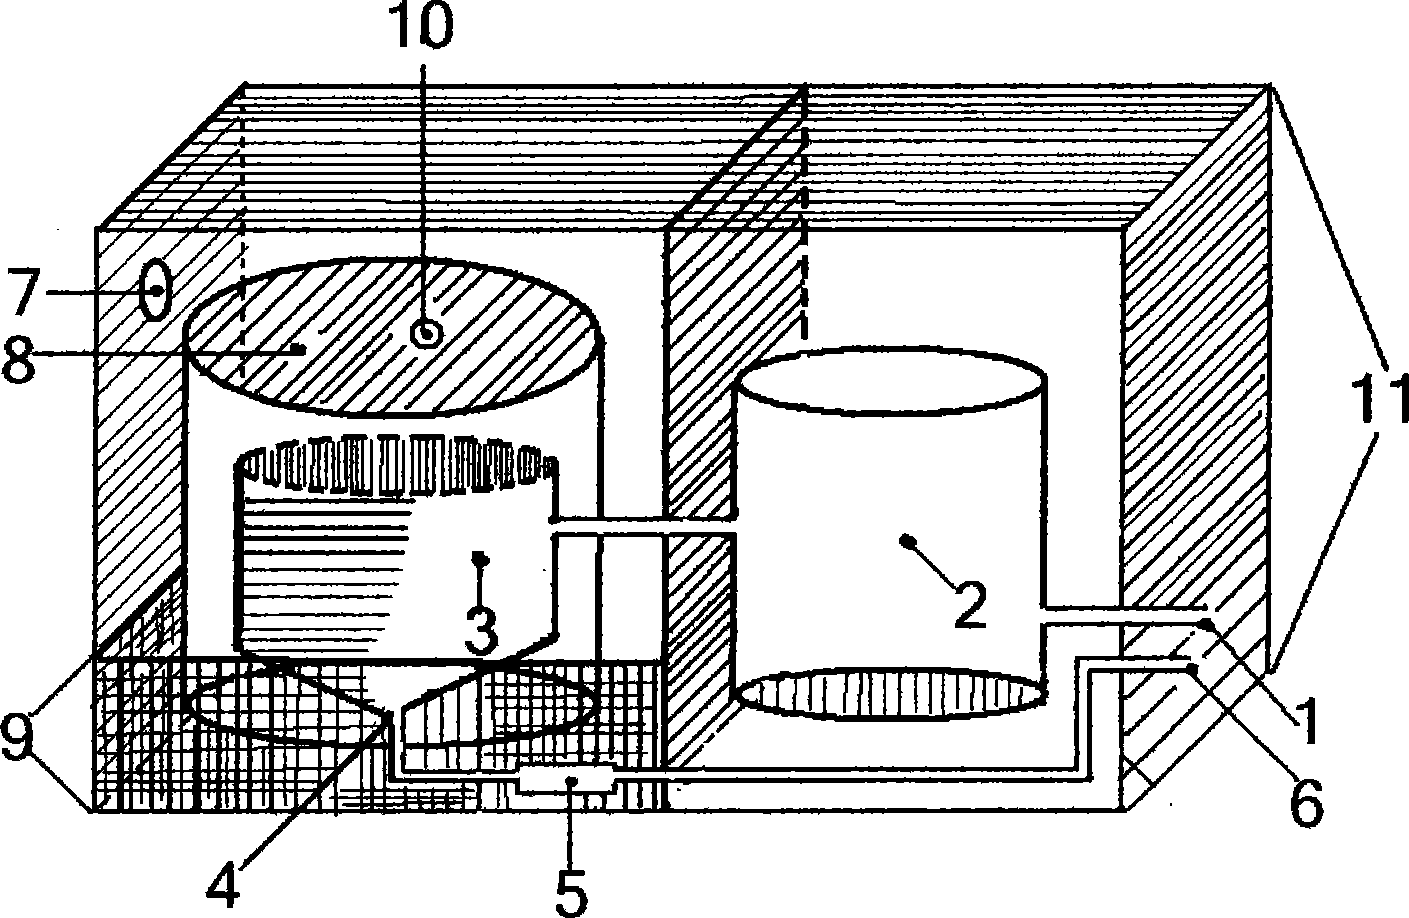 Condenser and its cooling device